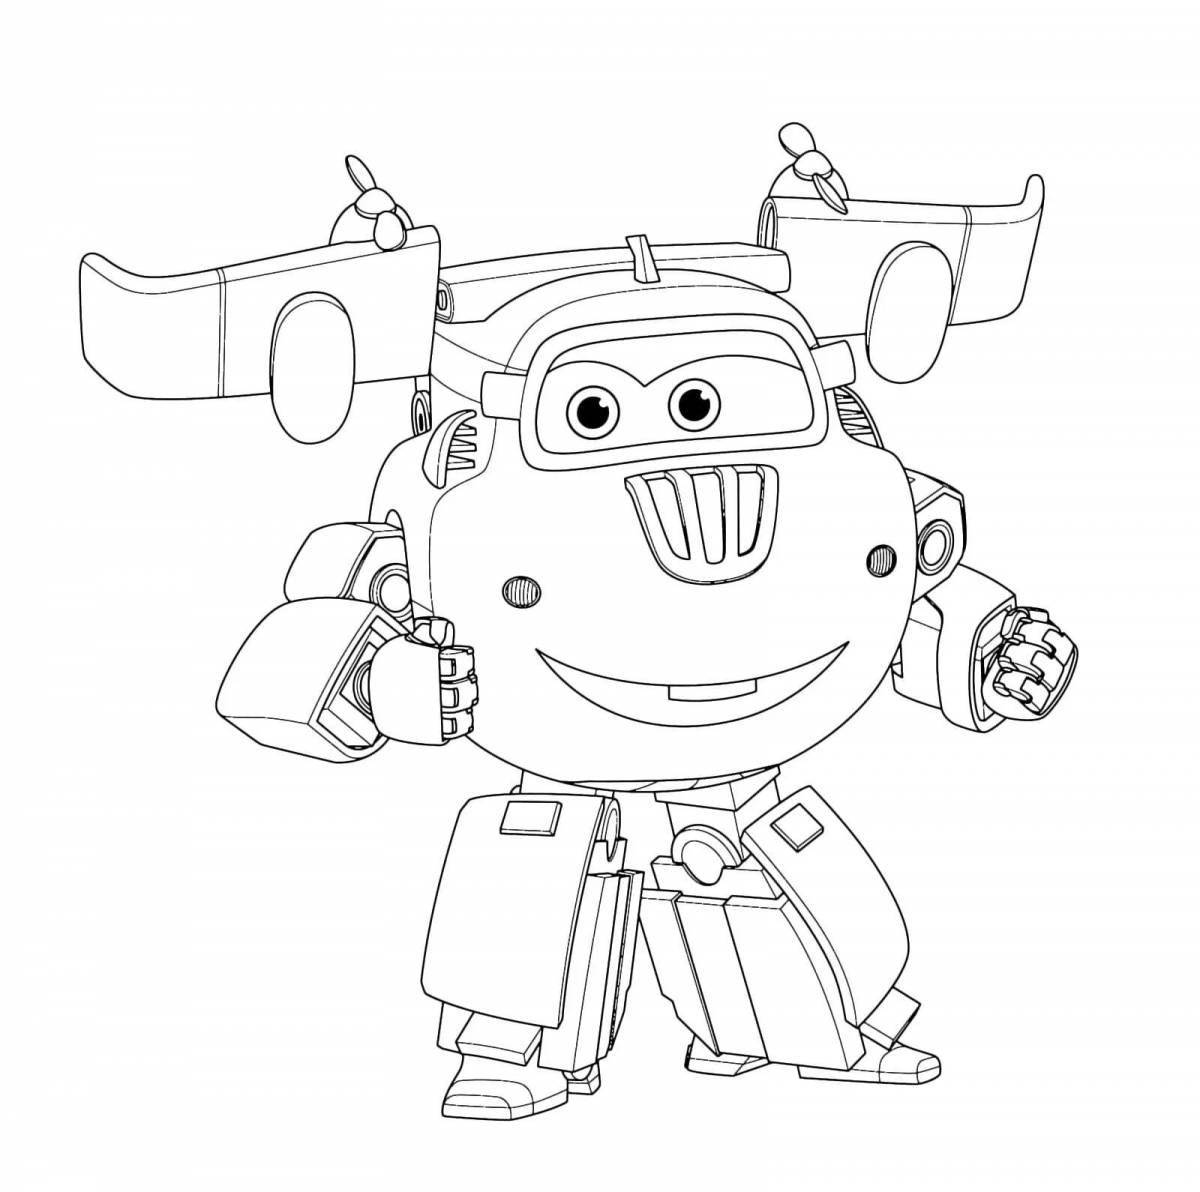 Crystal glamor super wings coloring page